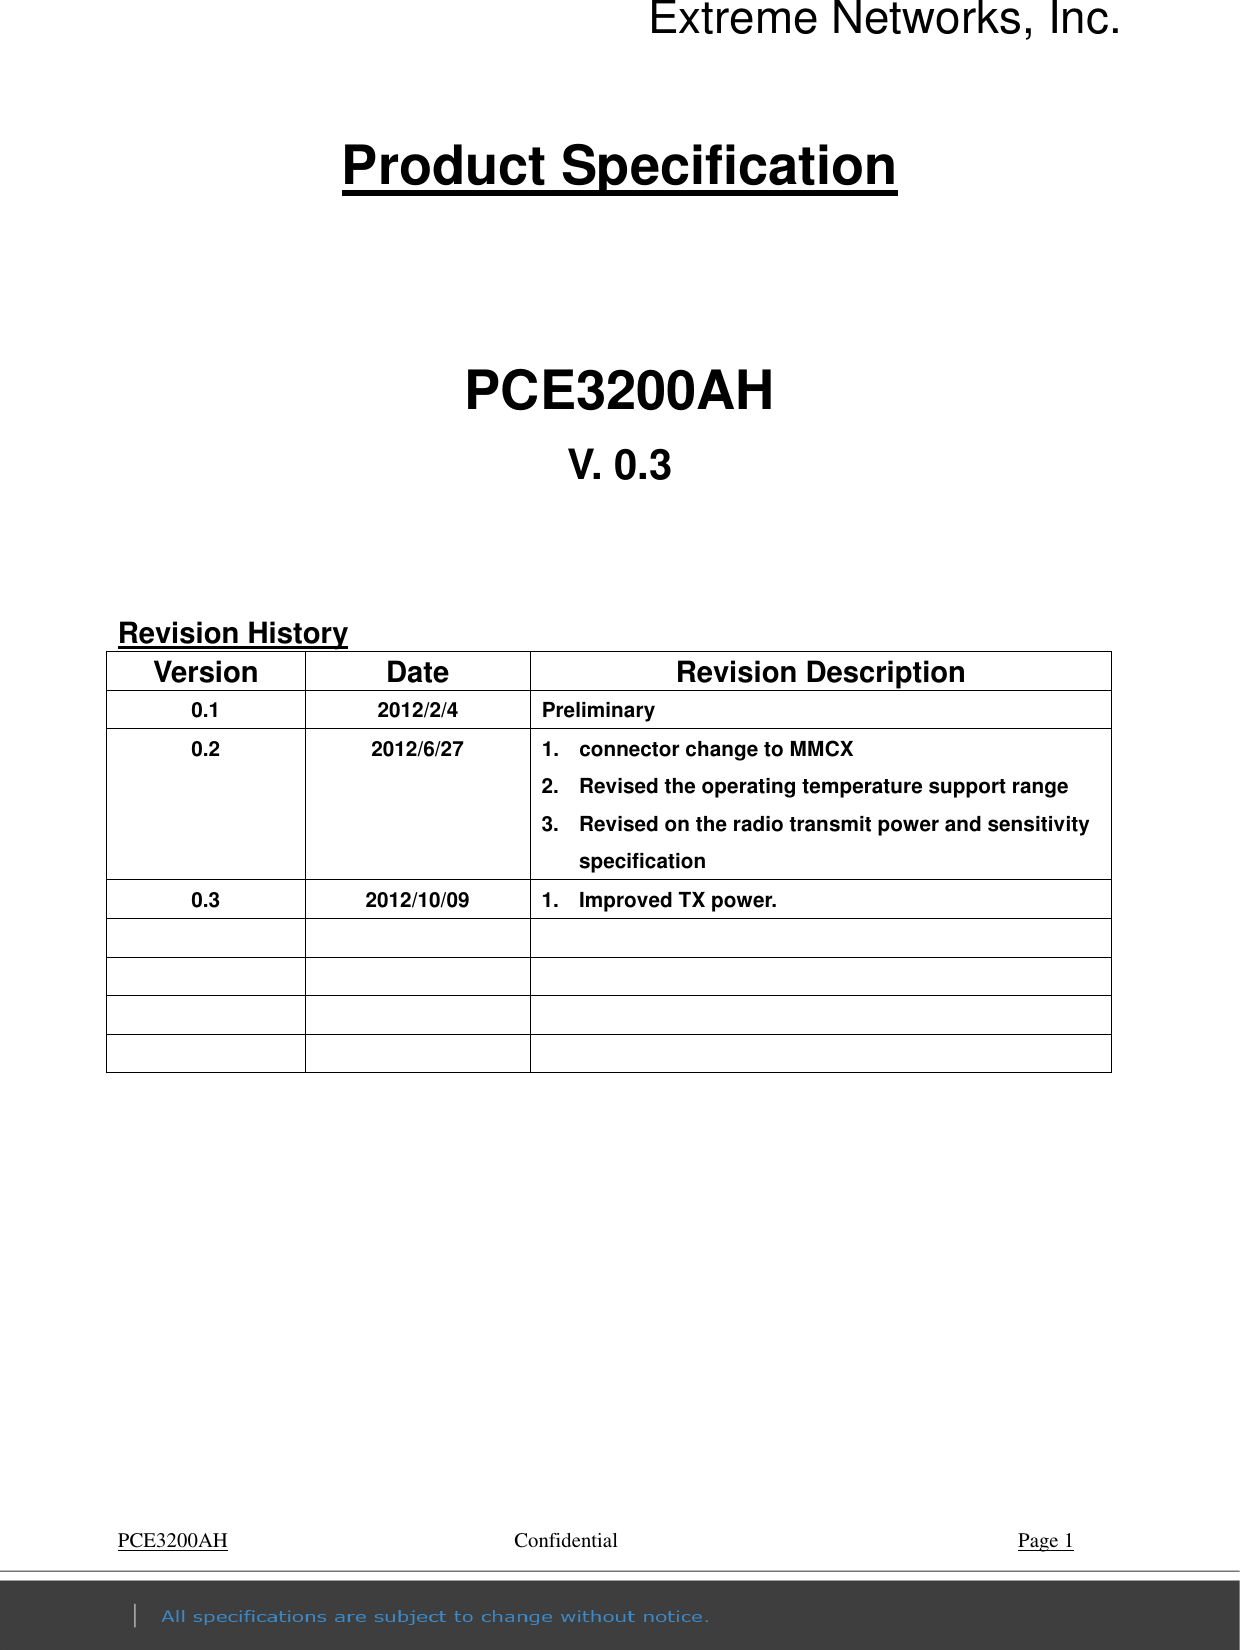 Extreme Networks, Inc. PCE3200AH        Confidential    Page 1 Product Specification   PCE3200AH V. 0.3   Revision History Version  Date  Revision Description 0.1  2012/2/4  Preliminary 0.2  2012/6/27  1.  connector change to MMCX 2.  Revised the operating temperature support range 3.  Revised on the radio transmit power and sensitivity specification 0.3  2012/10/09  1.  Improved TX power.                      